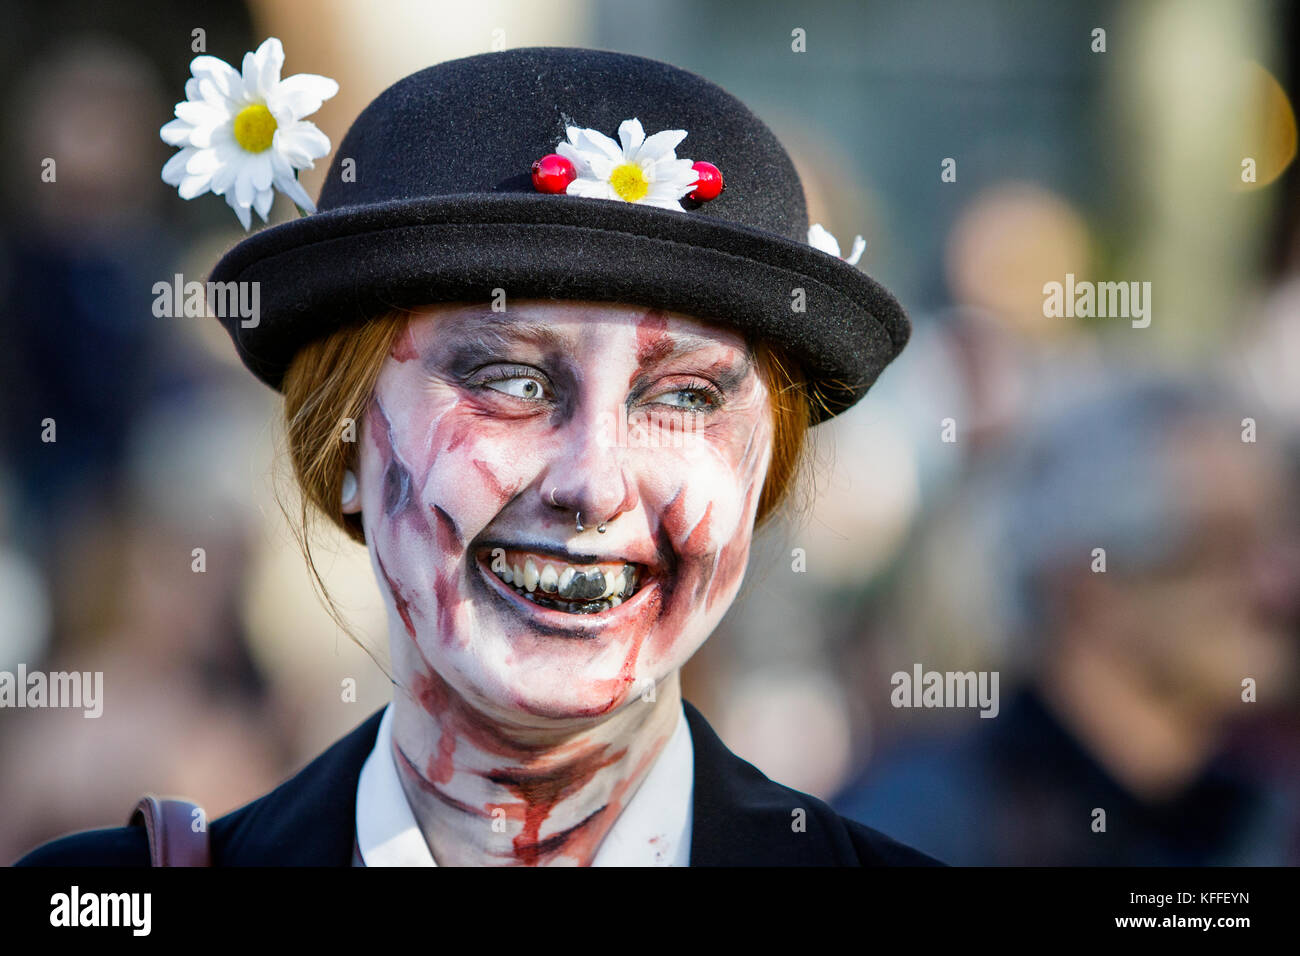 Bristol, UK. 28th Oct, 2017. A woman with a painted face, make up and dressed as a zombie is pictured as she participates in a Zombie Walk In Bristol. Stock Photo